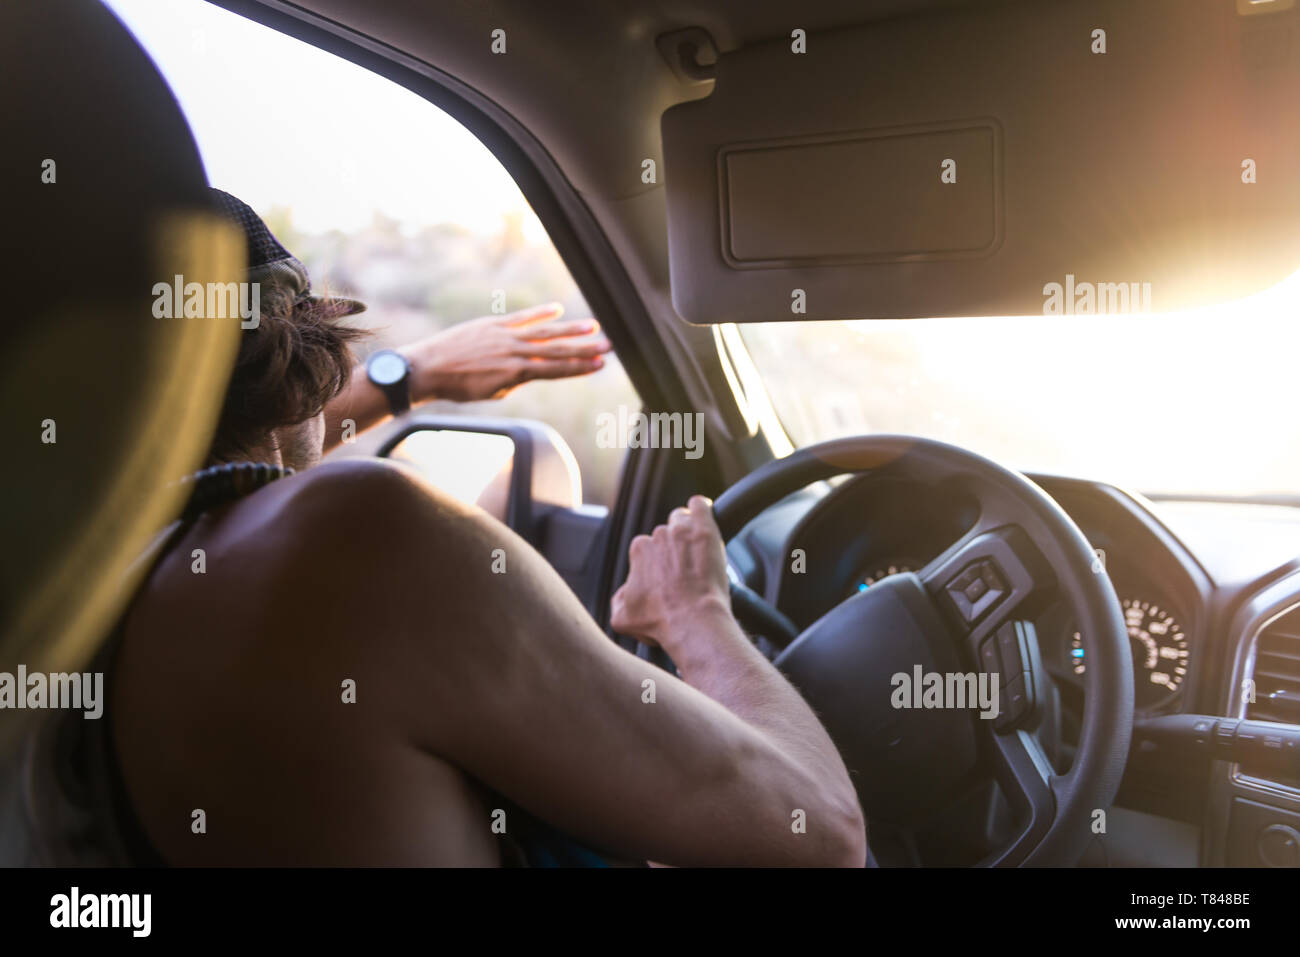 Man driving car shielding eyes from sunlight, over shoulder view Stock Photo